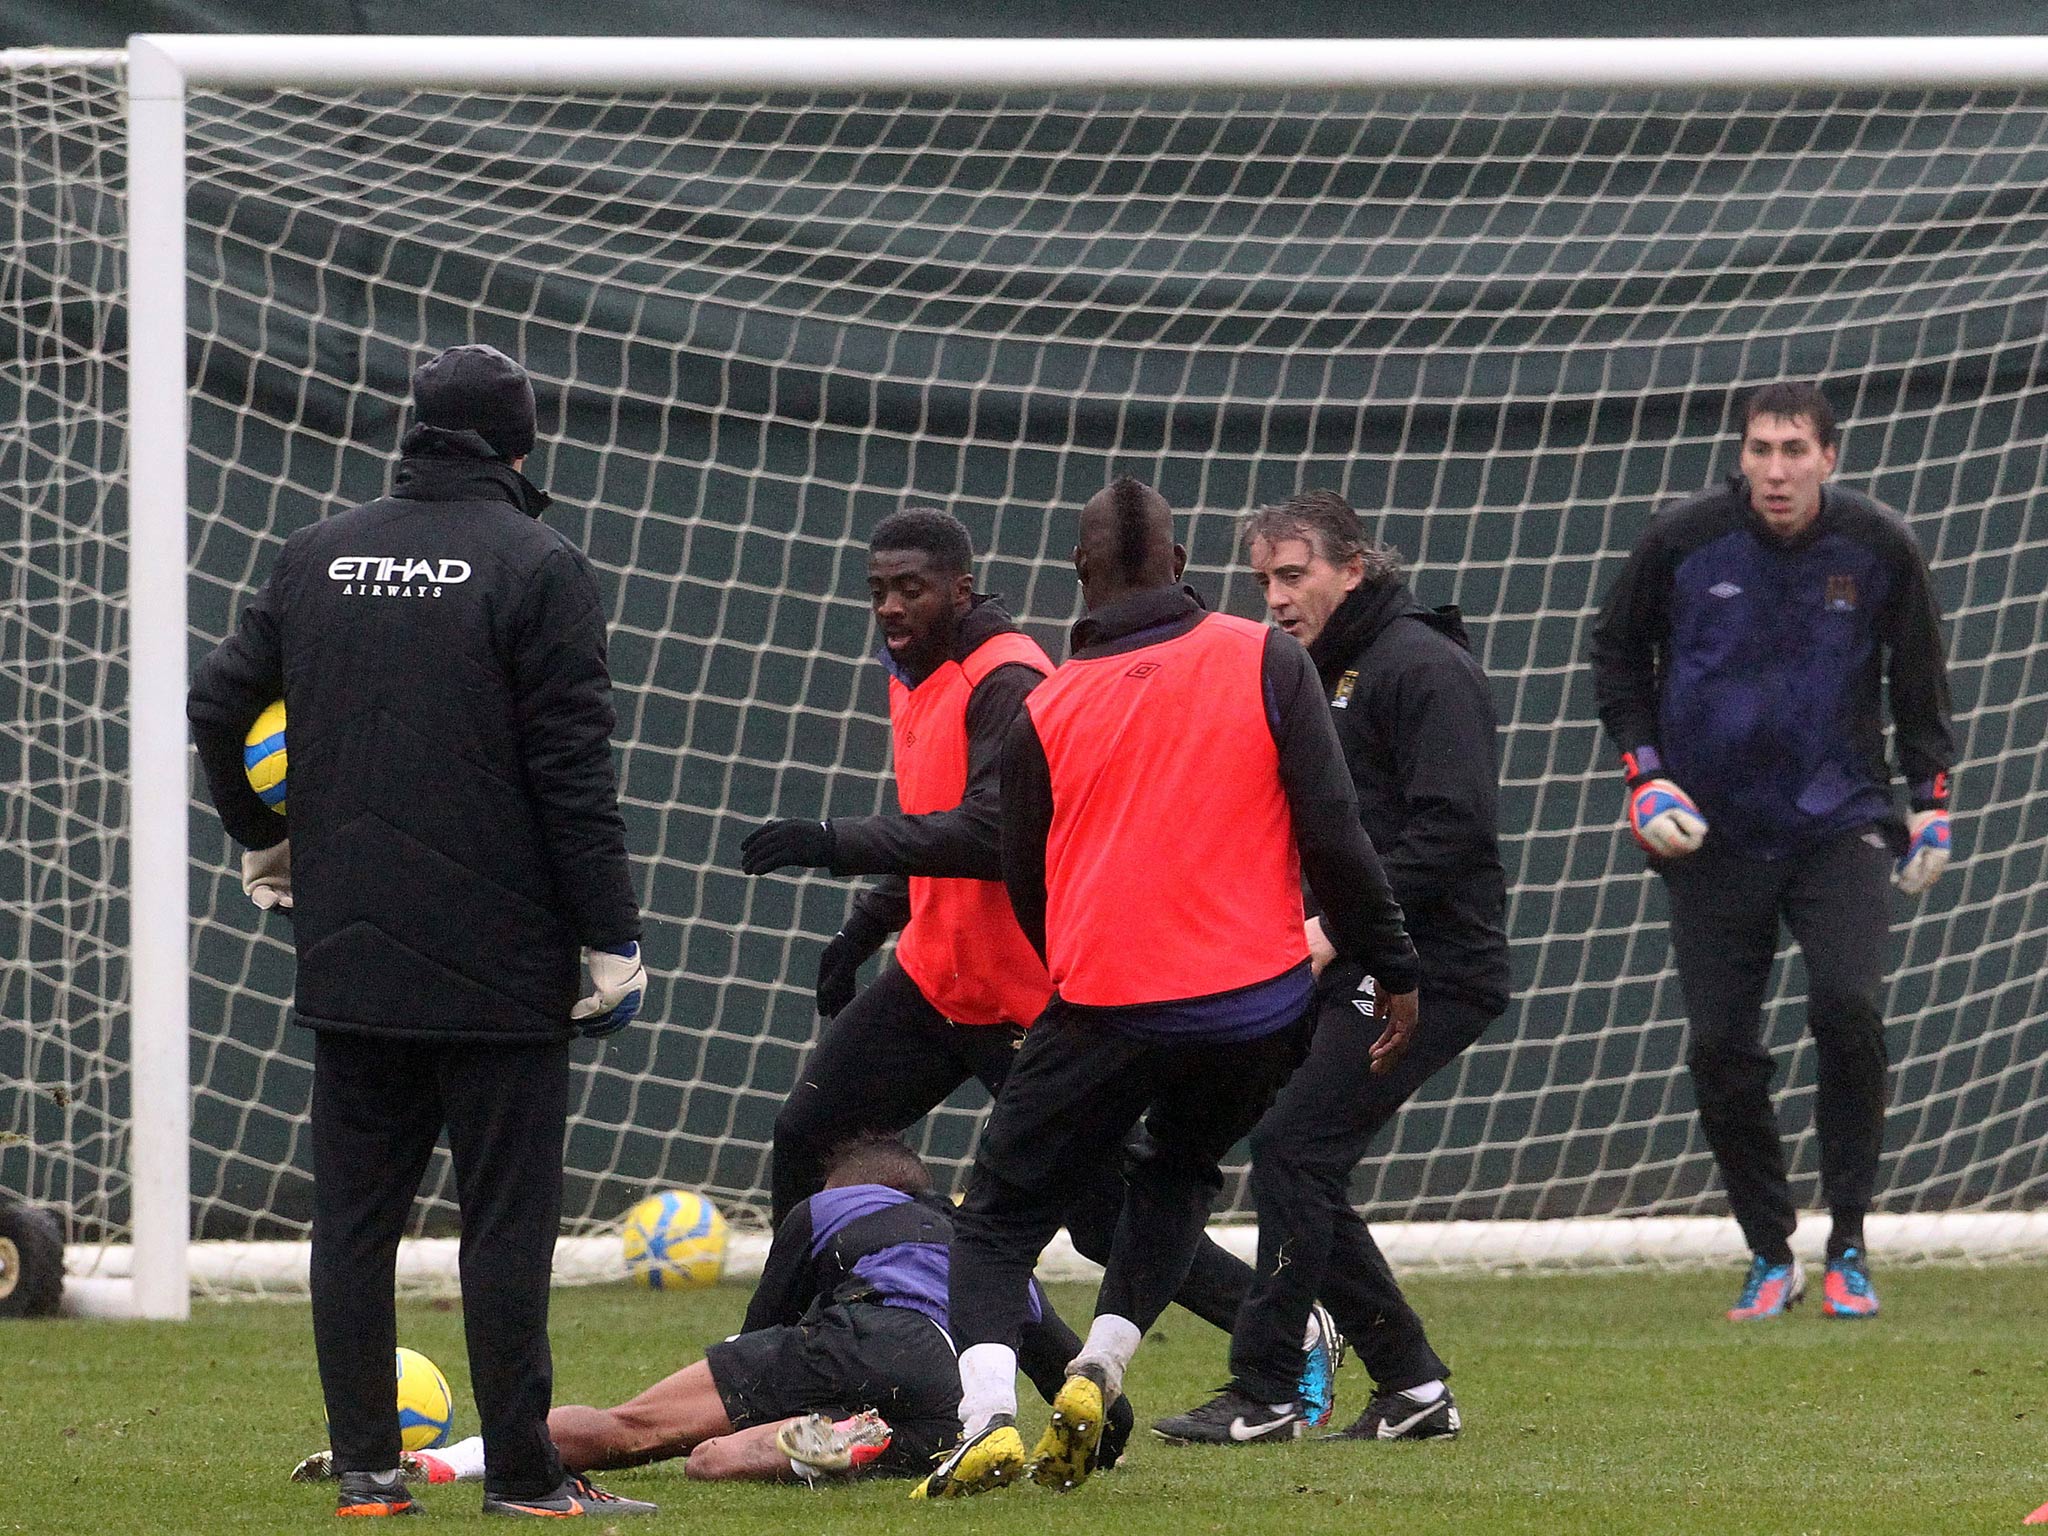 The incident was sparked when Balotelliu challenged Scott Sinclair